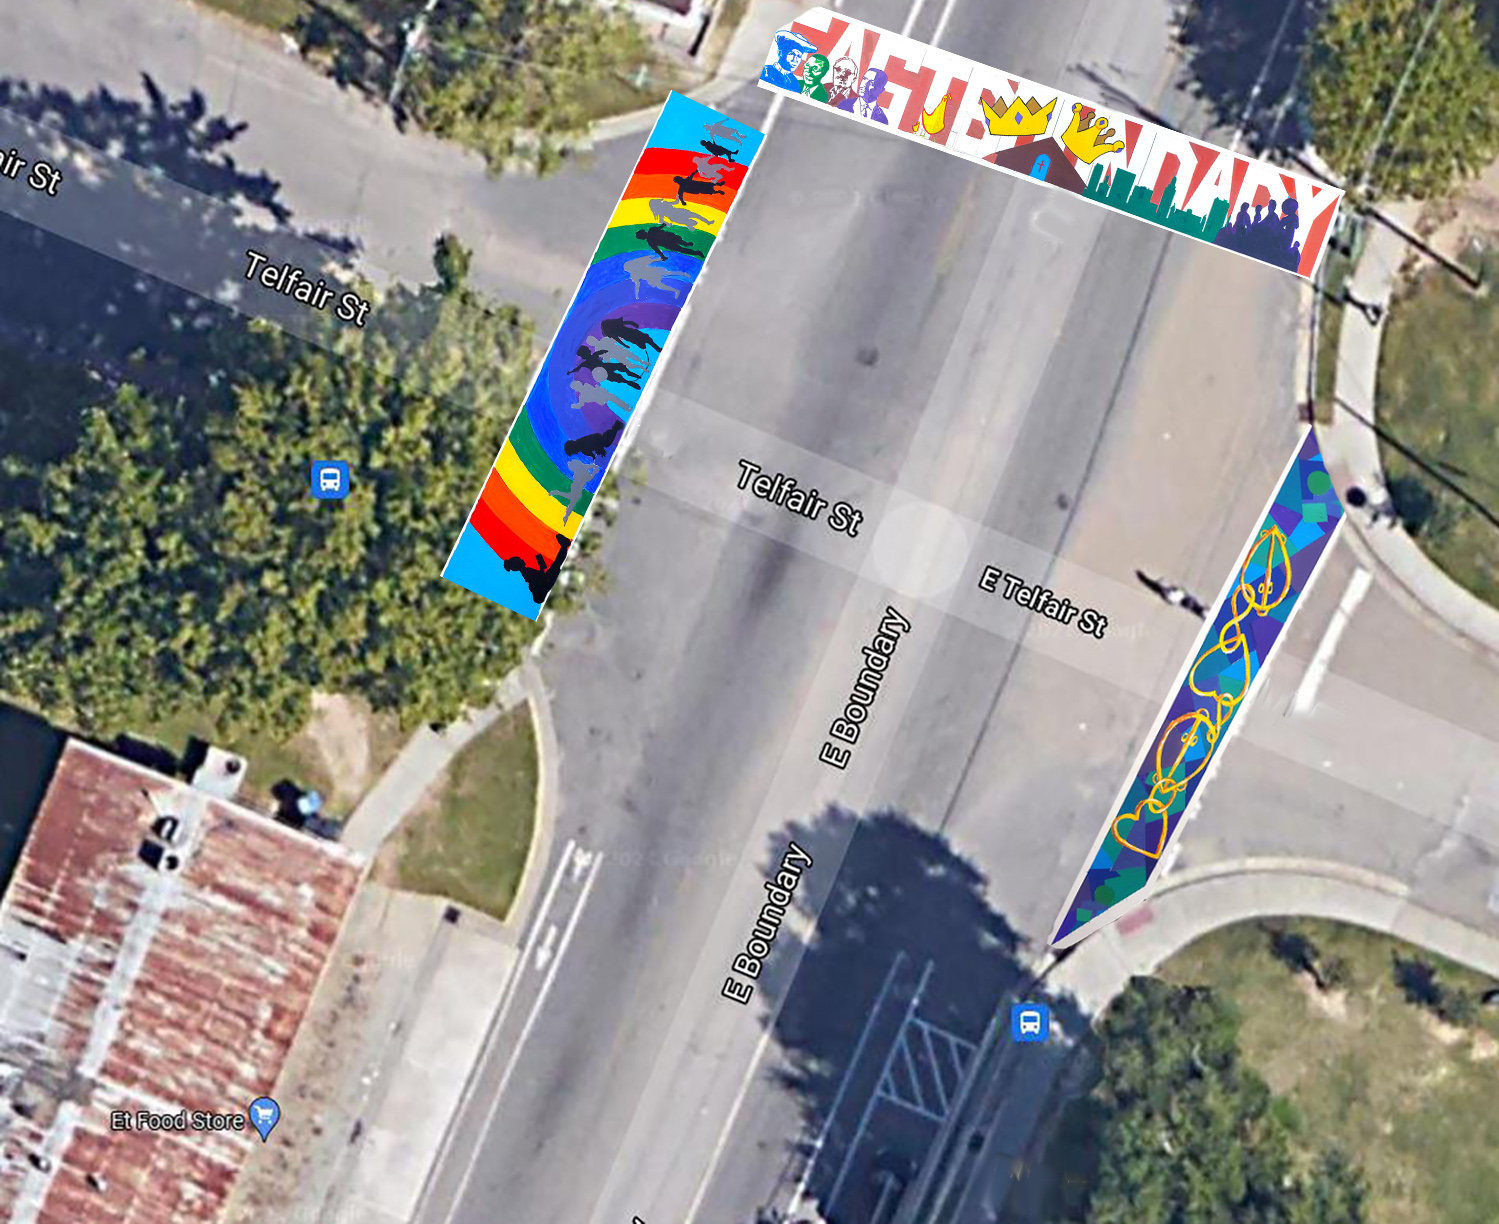 Mock up of cross walk murals over map of east boundry and telfair streets